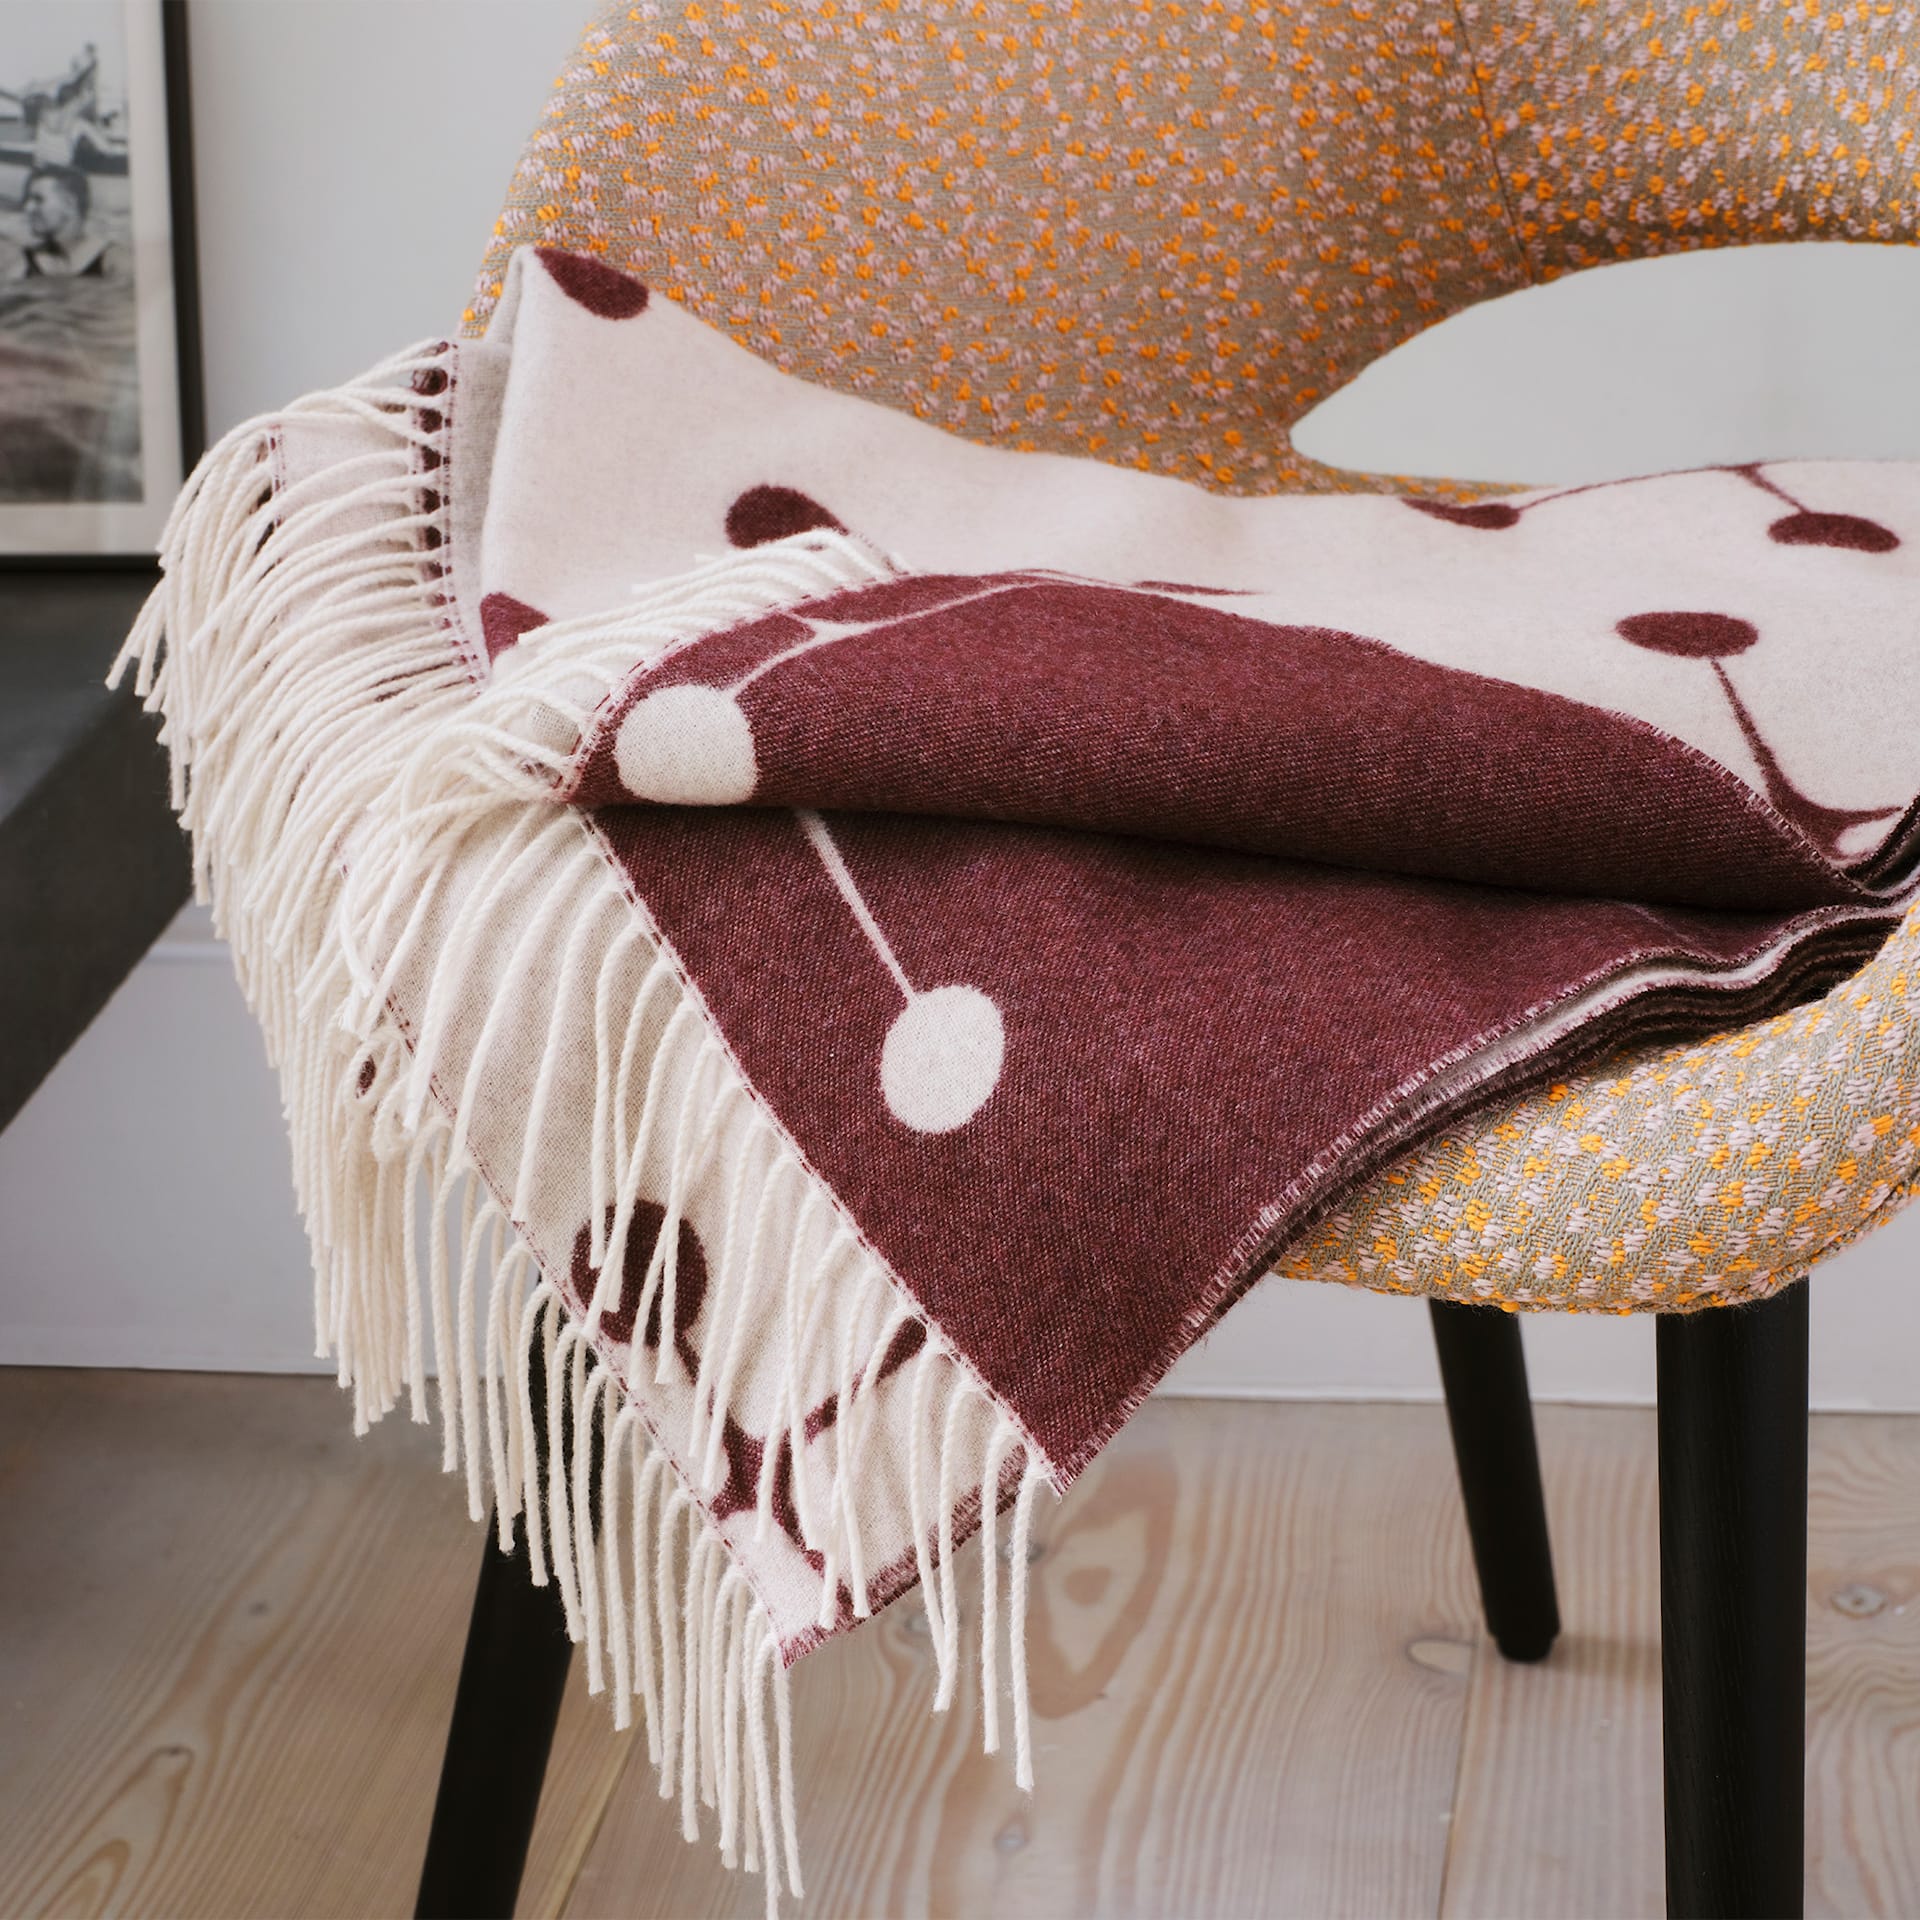 Eames Wool Blanket - Eames Special Collection - Vitra - Charles & Ray Eames - NO GA